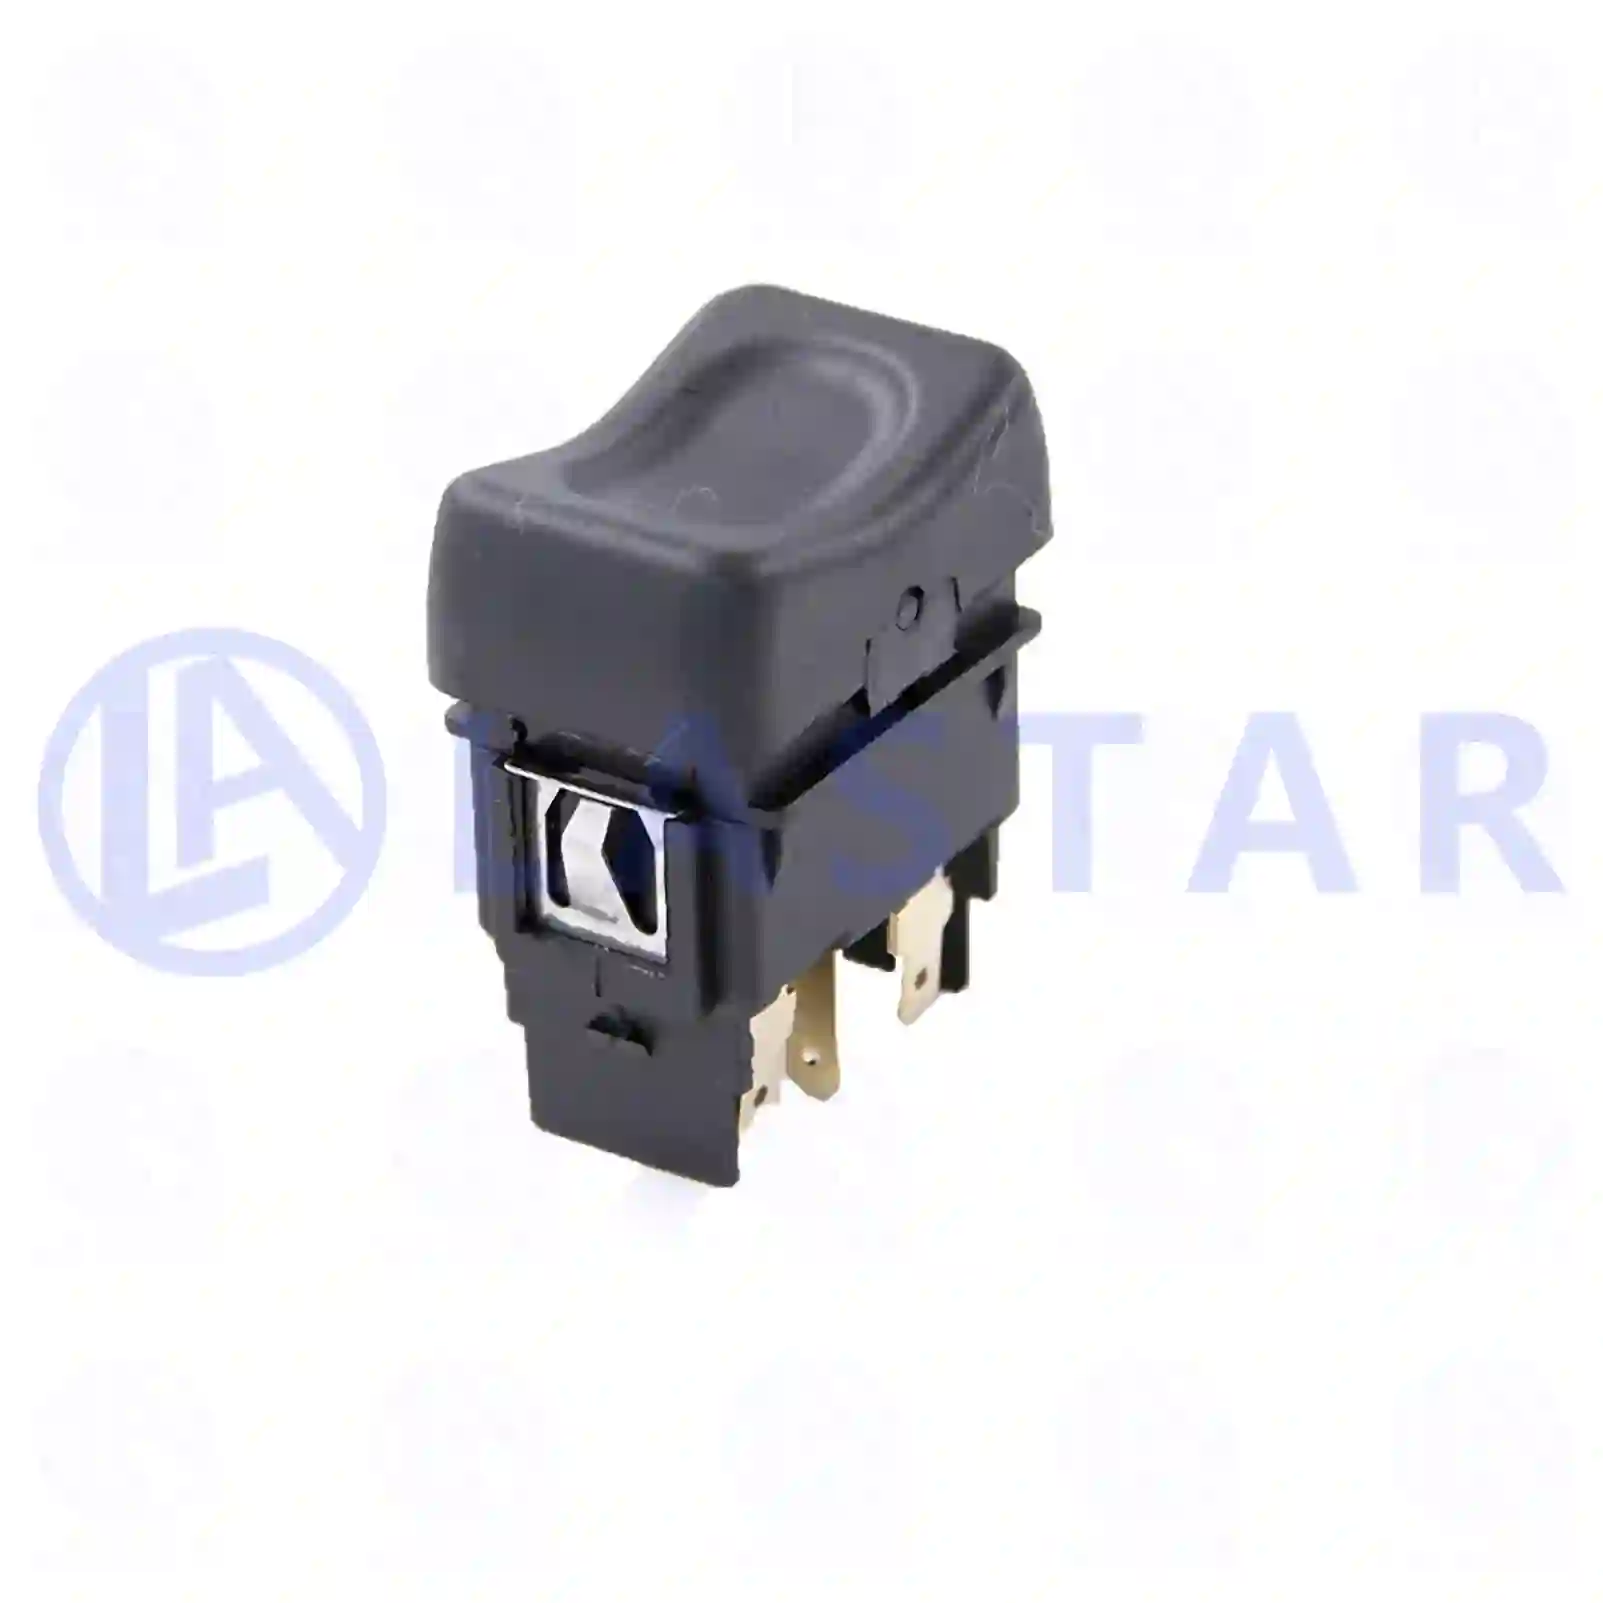 Switch, 77710912, 353628, ZG20164-0008 ||  77710912 Lastar Spare Part | Truck Spare Parts, Auotomotive Spare Parts Switch, 77710912, 353628, ZG20164-0008 ||  77710912 Lastar Spare Part | Truck Spare Parts, Auotomotive Spare Parts